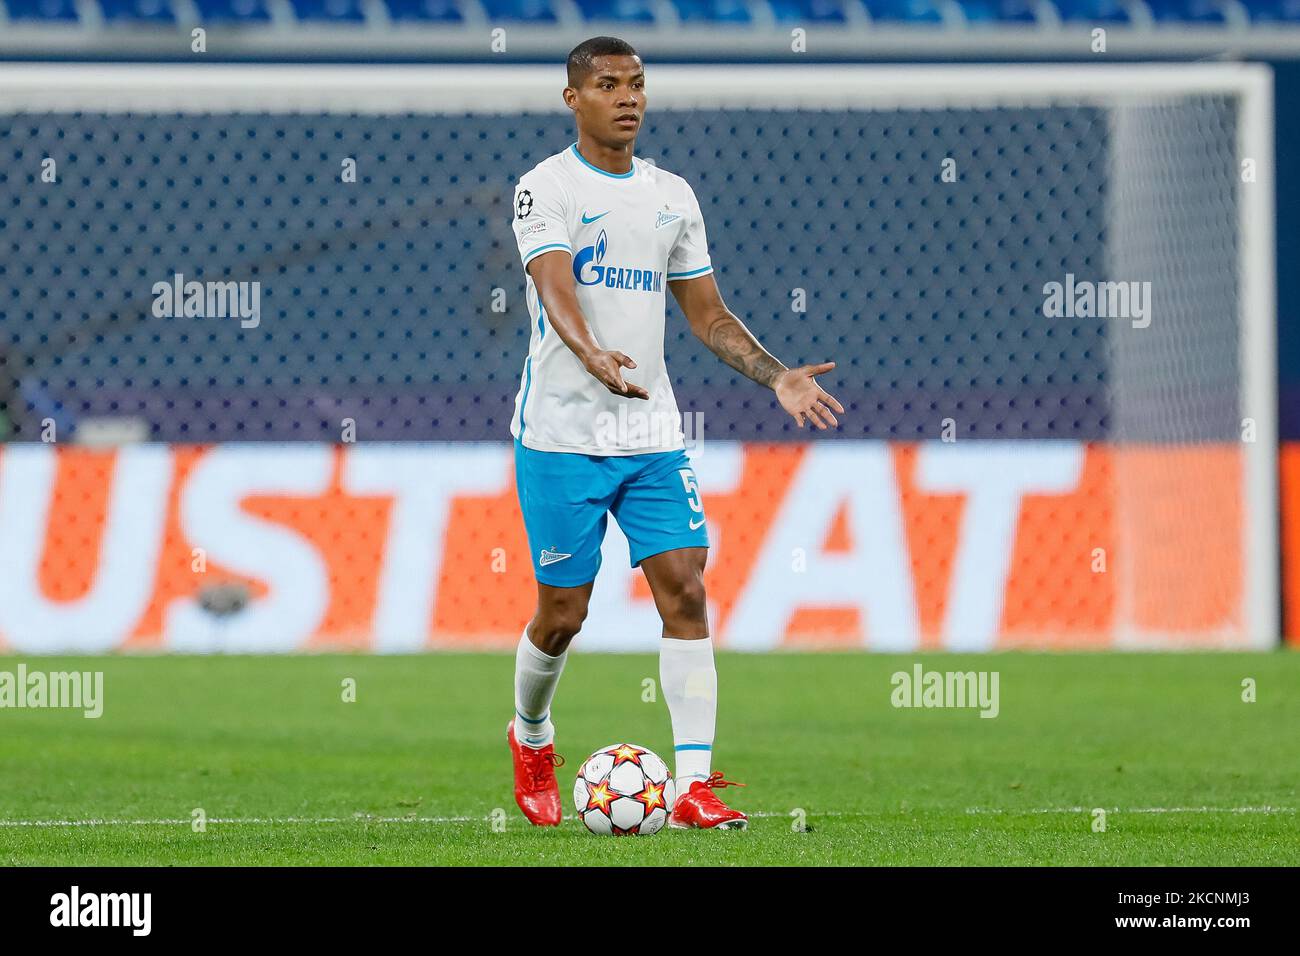 Wilmar Barrios of Zenit gestures during the UEFA Champions League Group H match between Zenit St. Petersburg and Malmo FF on September 29, 2021 at Gazprom Arena in Saint Petersburg, Russia. (Photo by Mike Kireev/NurPhoto) Stock Photo